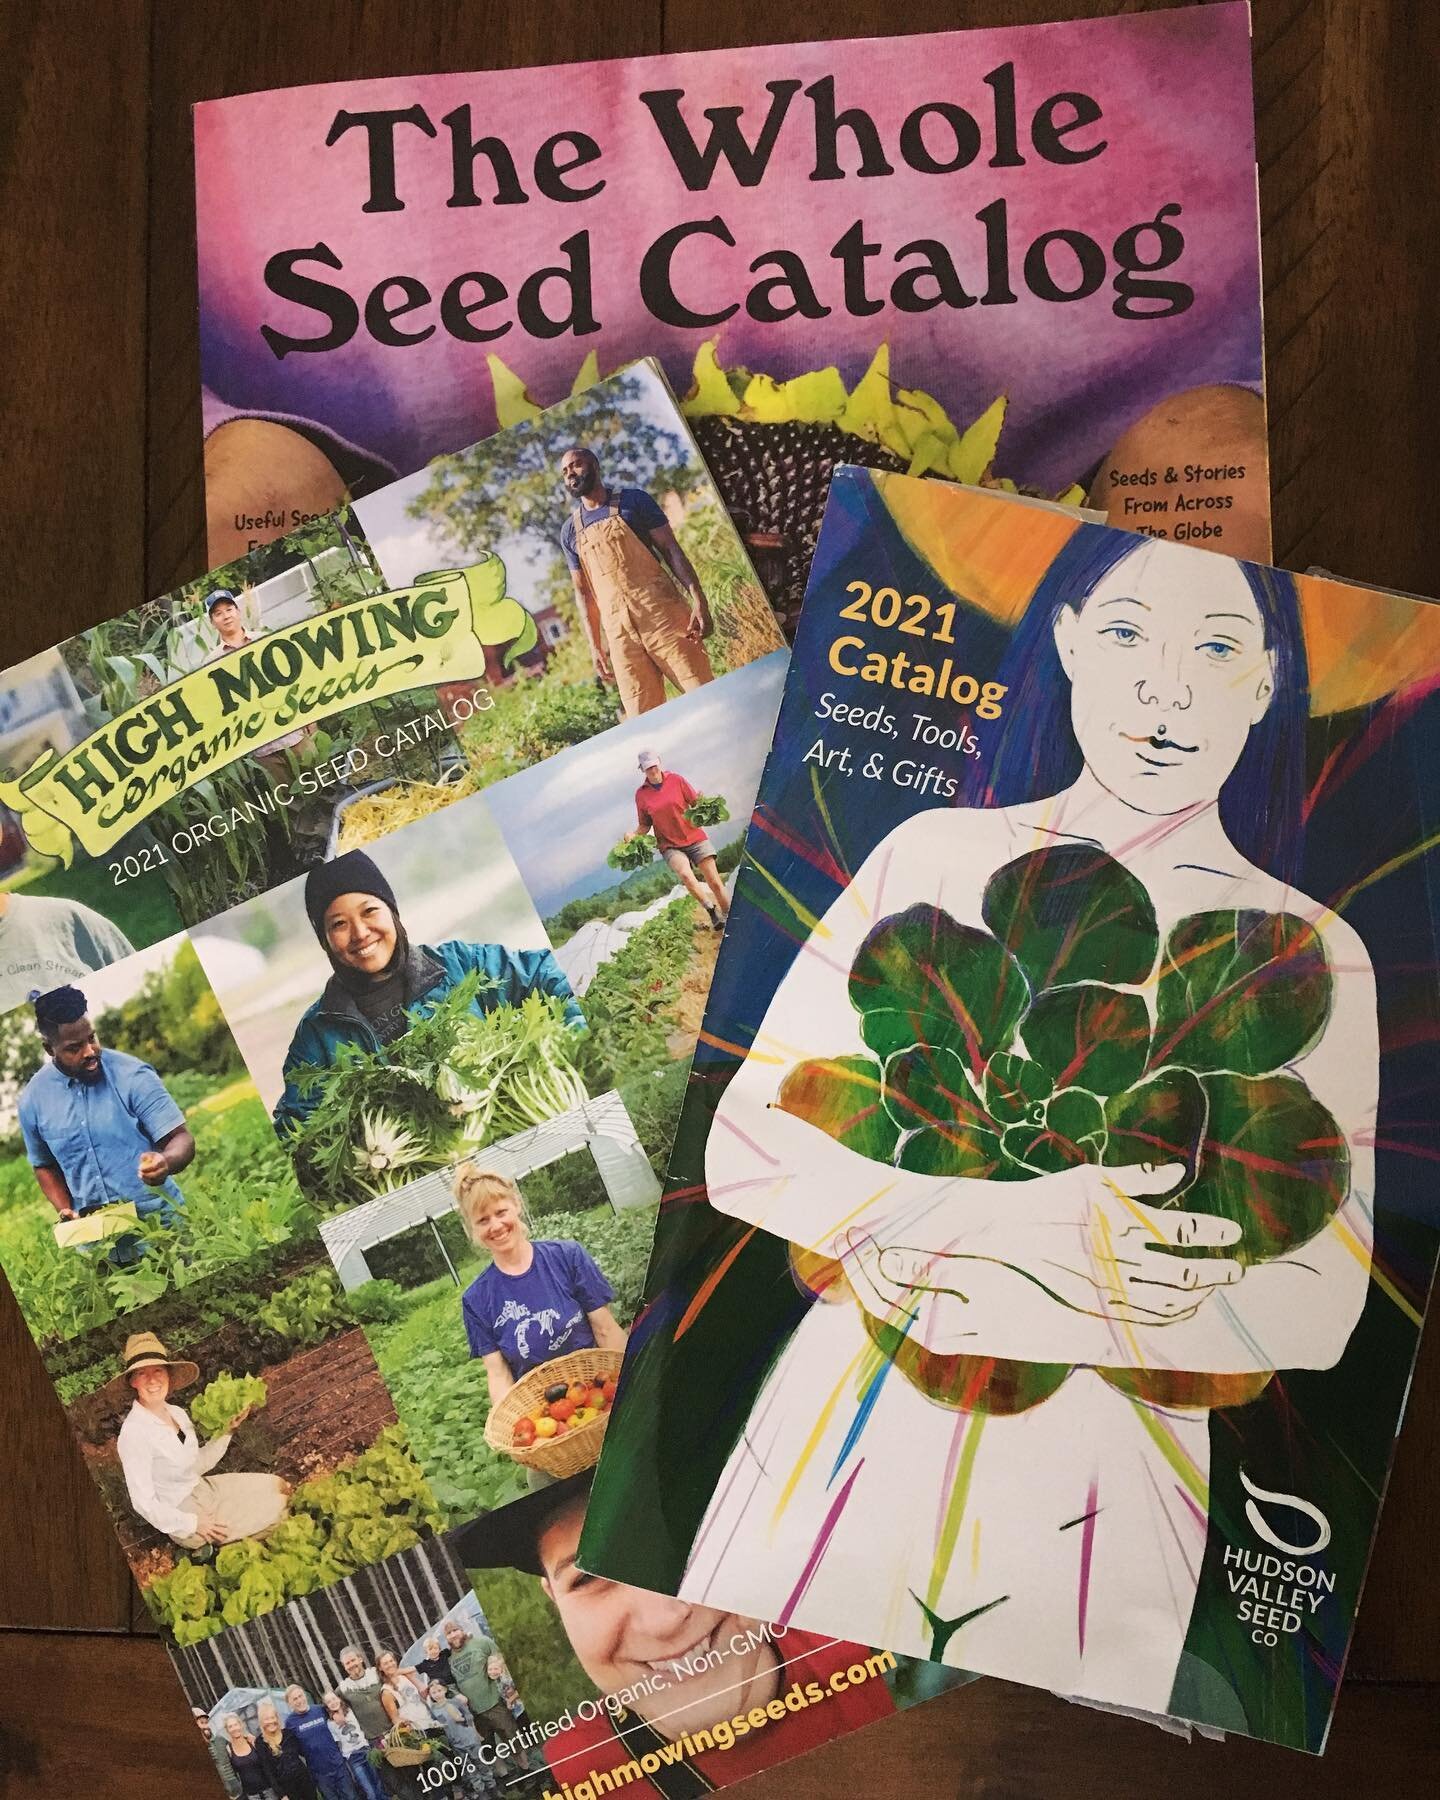 Warmer days are coming soon! While today might be snowy, cold &amp; windy, it&rsquo;s a great day to begin planning out this year&rsquo;s garden. 

We absolutely love @hudsonvalleyseedco @highmowingorganicseeds &amp; @bakercreekseeds 

These companie